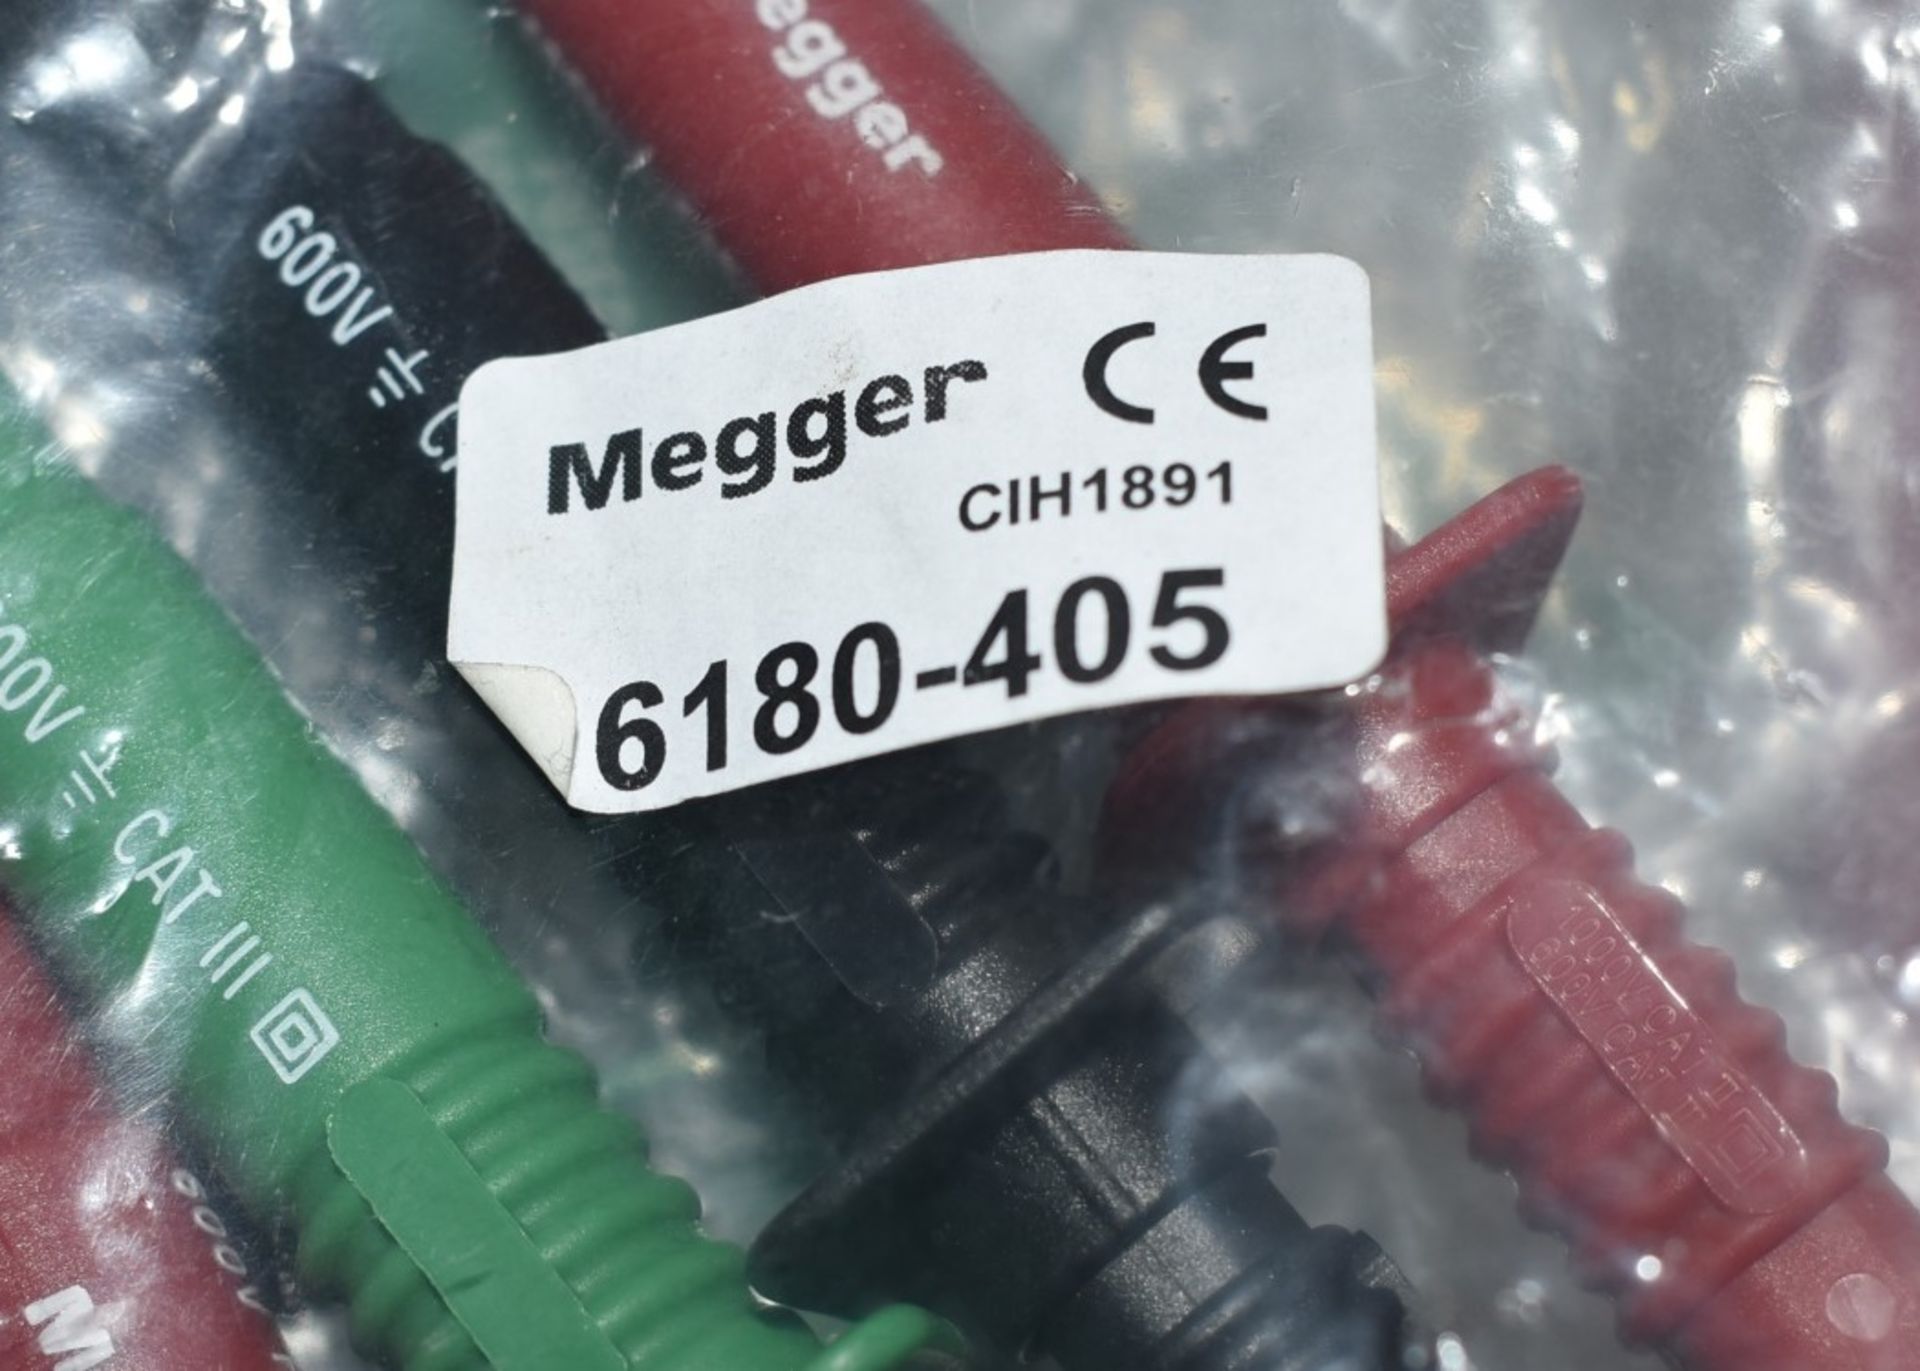 1 x MEGGER 6180-405 Crocodile Clips & Probes - Quantity As Shown - Image 3 of 3